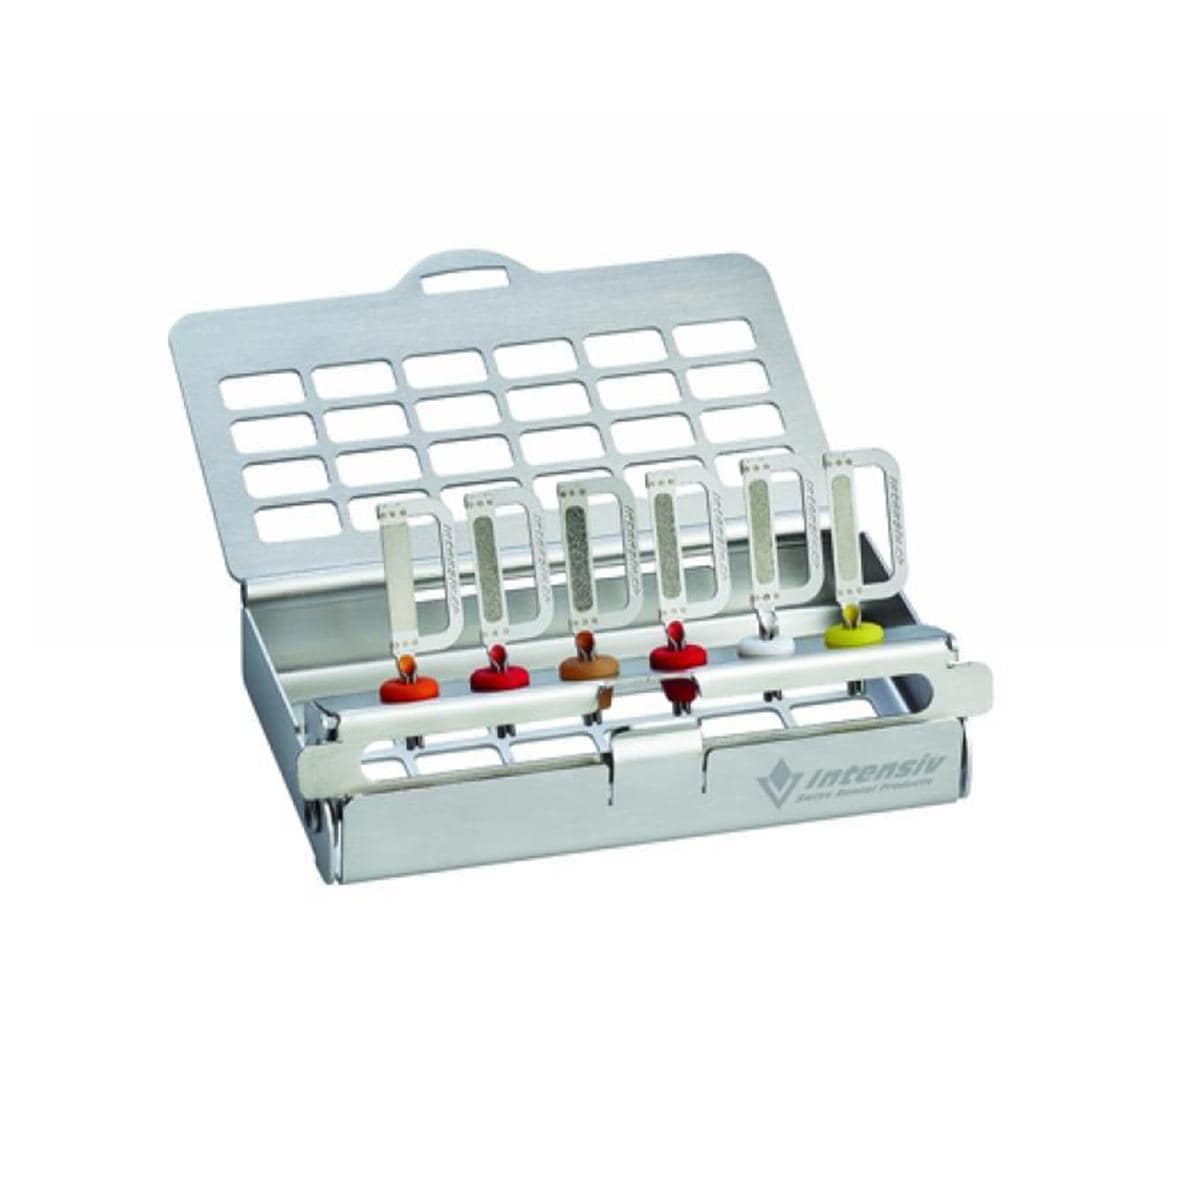 Ortho-Strips System Double Sided Set 01 - Tray met 1 Opener & 5 Central Strips